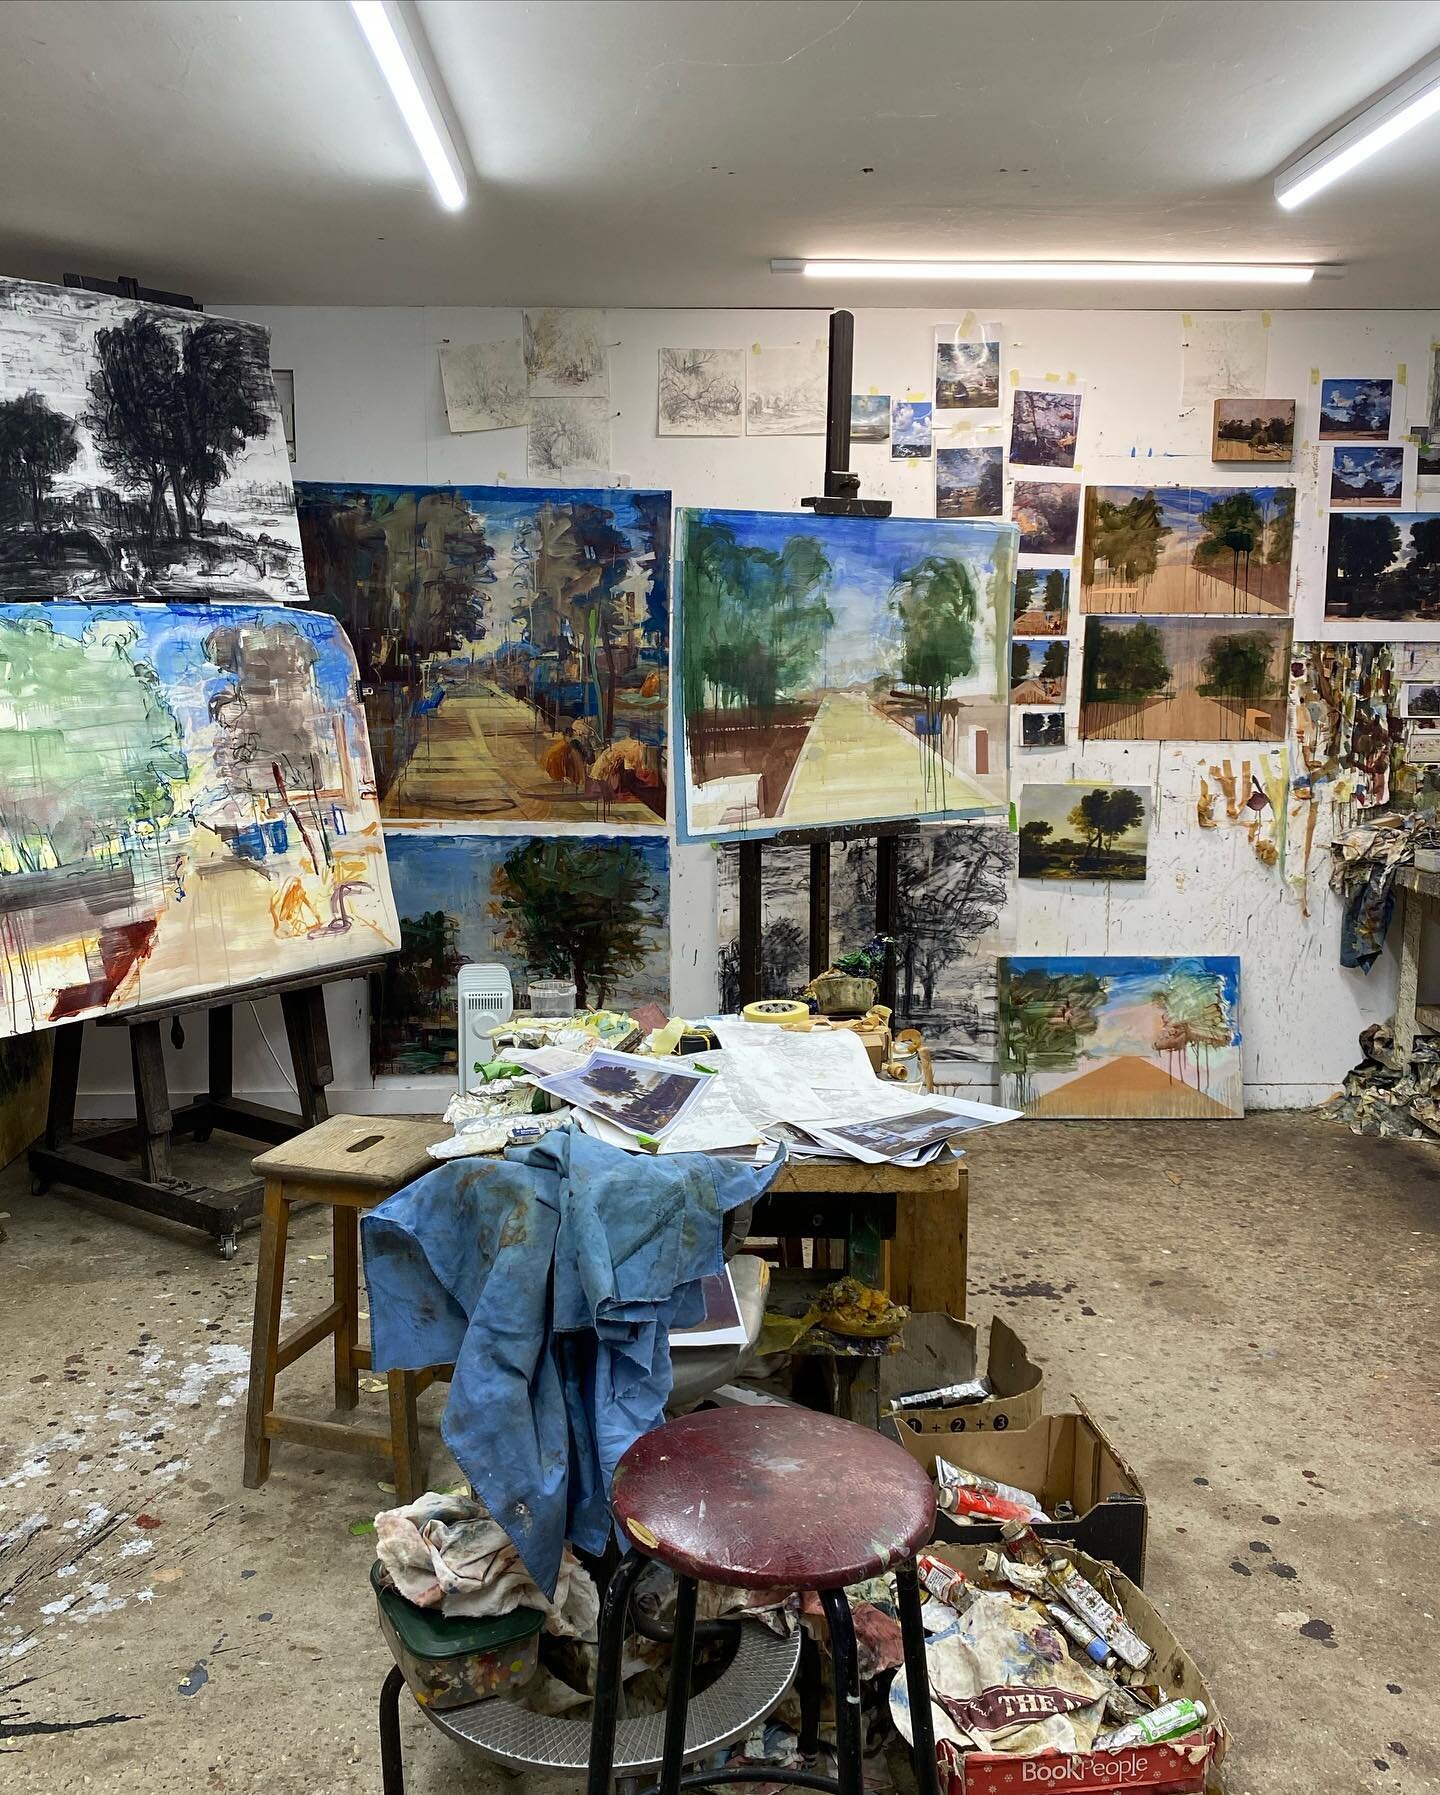 Back in the studio with Kate Giles, unravelling those Old Masters. Swipe to see beautiful studies and works in progress as she dissects and recreates the compositions and colours of #claudelorrain and #nicholaspoussin